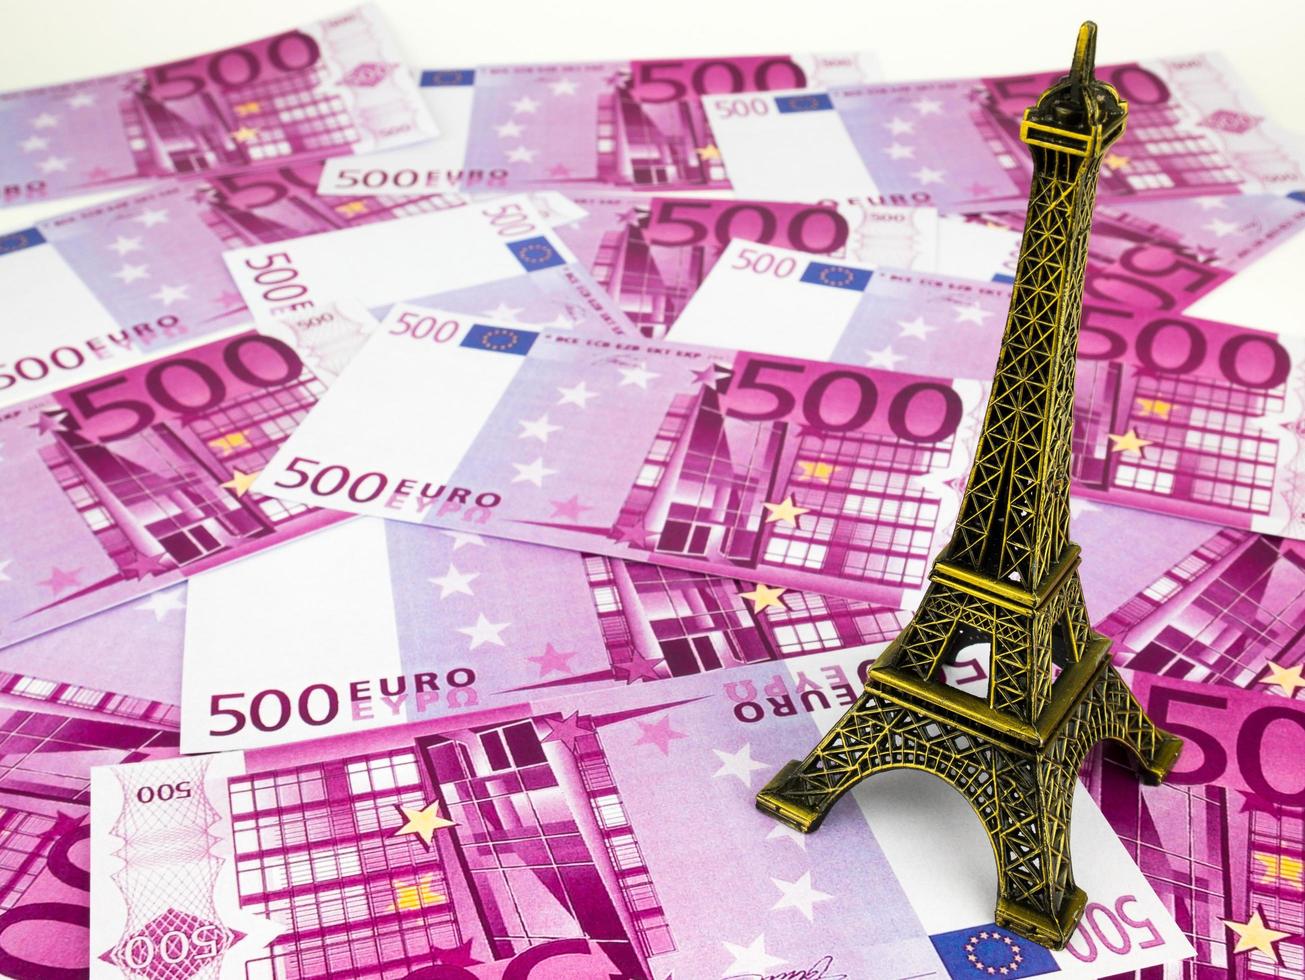 Five hundred 500 Euro bills banknotes with Eiffel tower replica, European currency money background photo